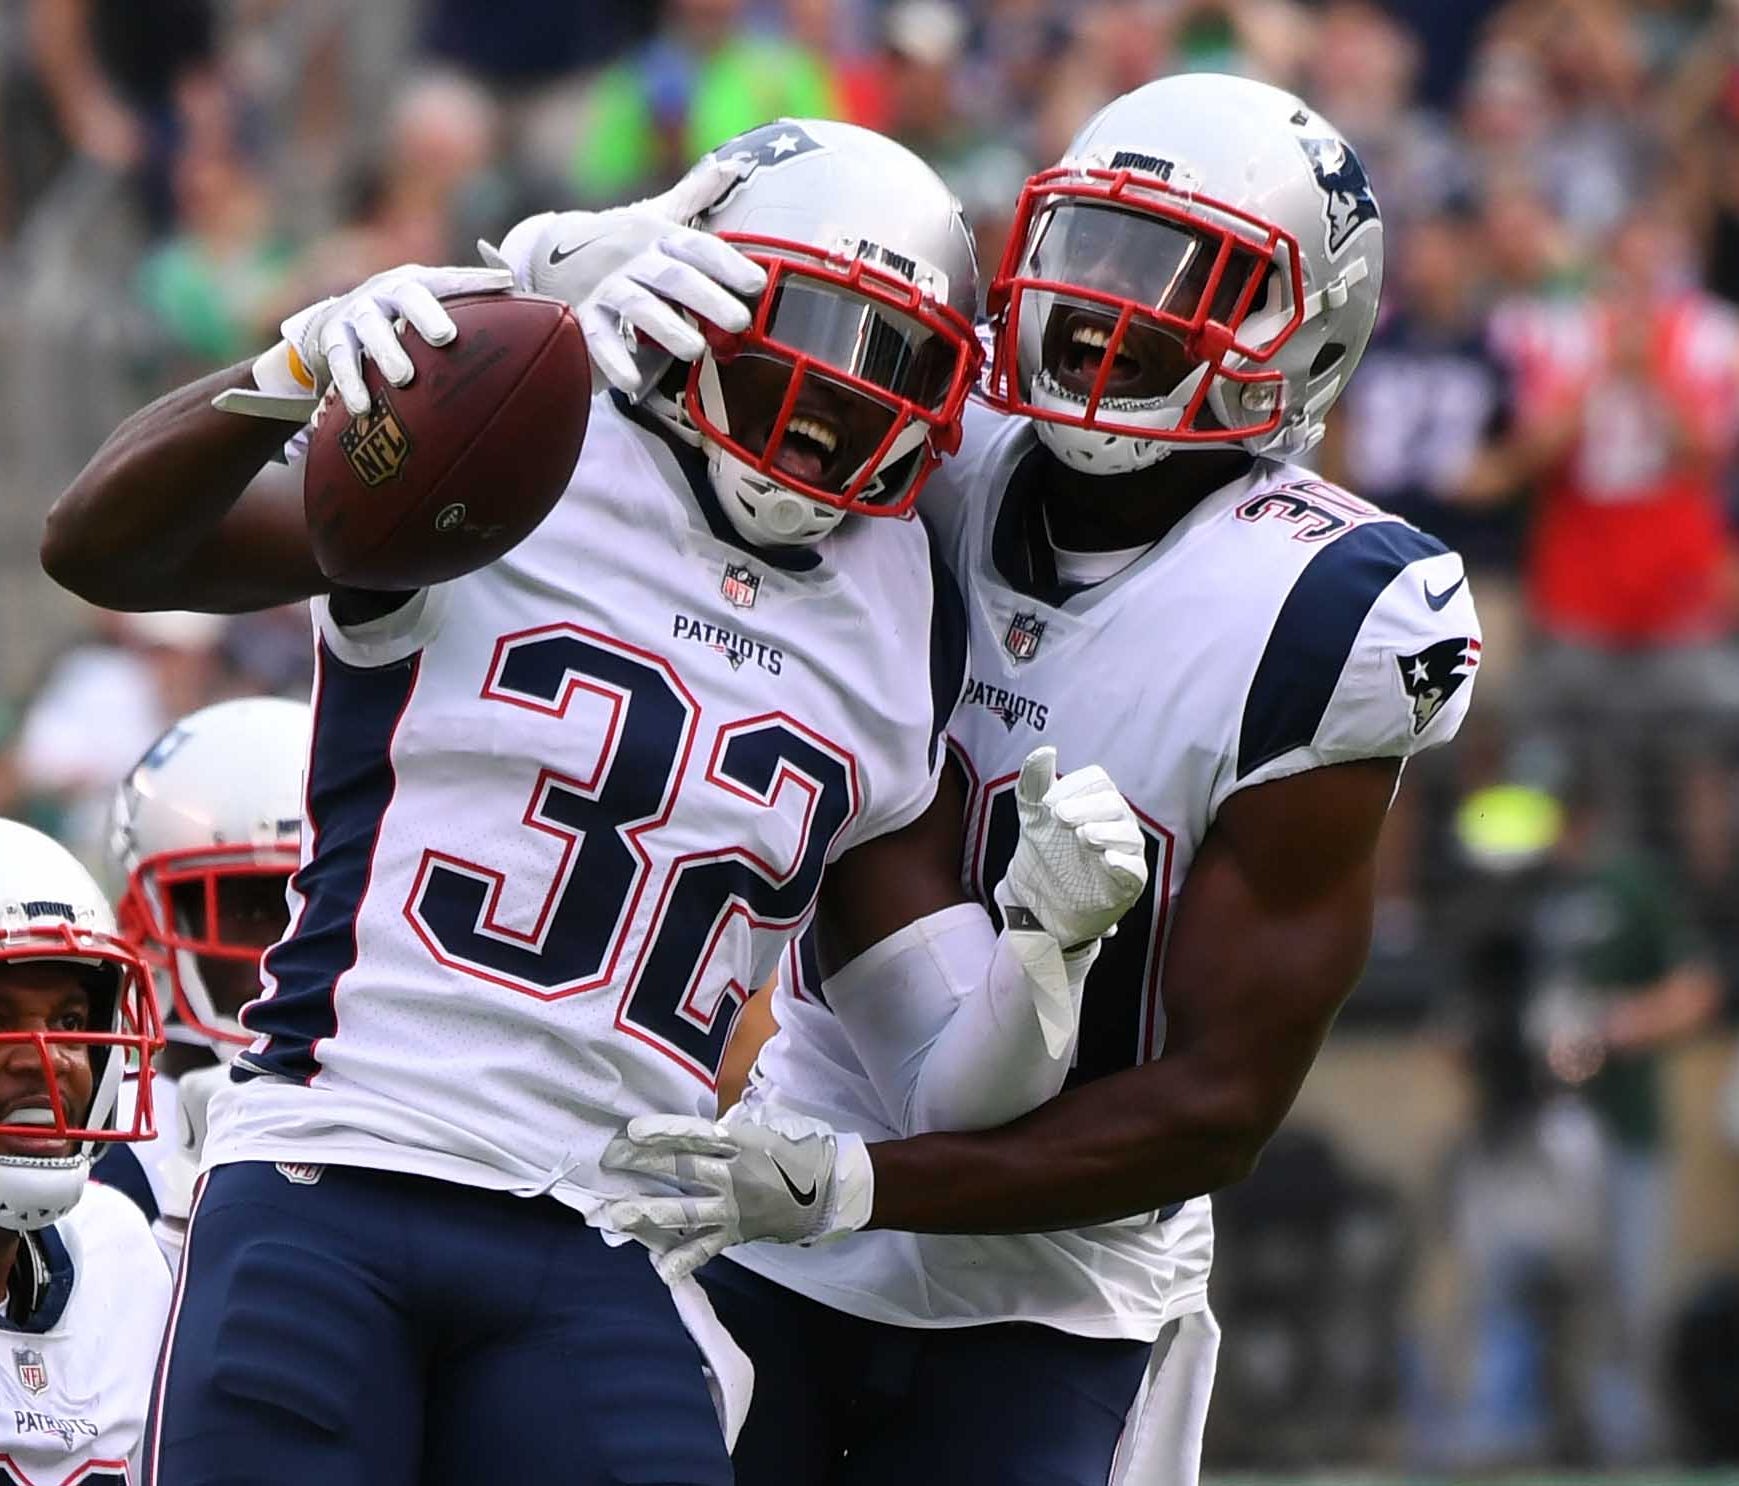 The New England Patriots safety Devin McCourty (32), celebrates with safety Duron Harmon (30) against the New York Jets during the second half at MetLife Stadium.